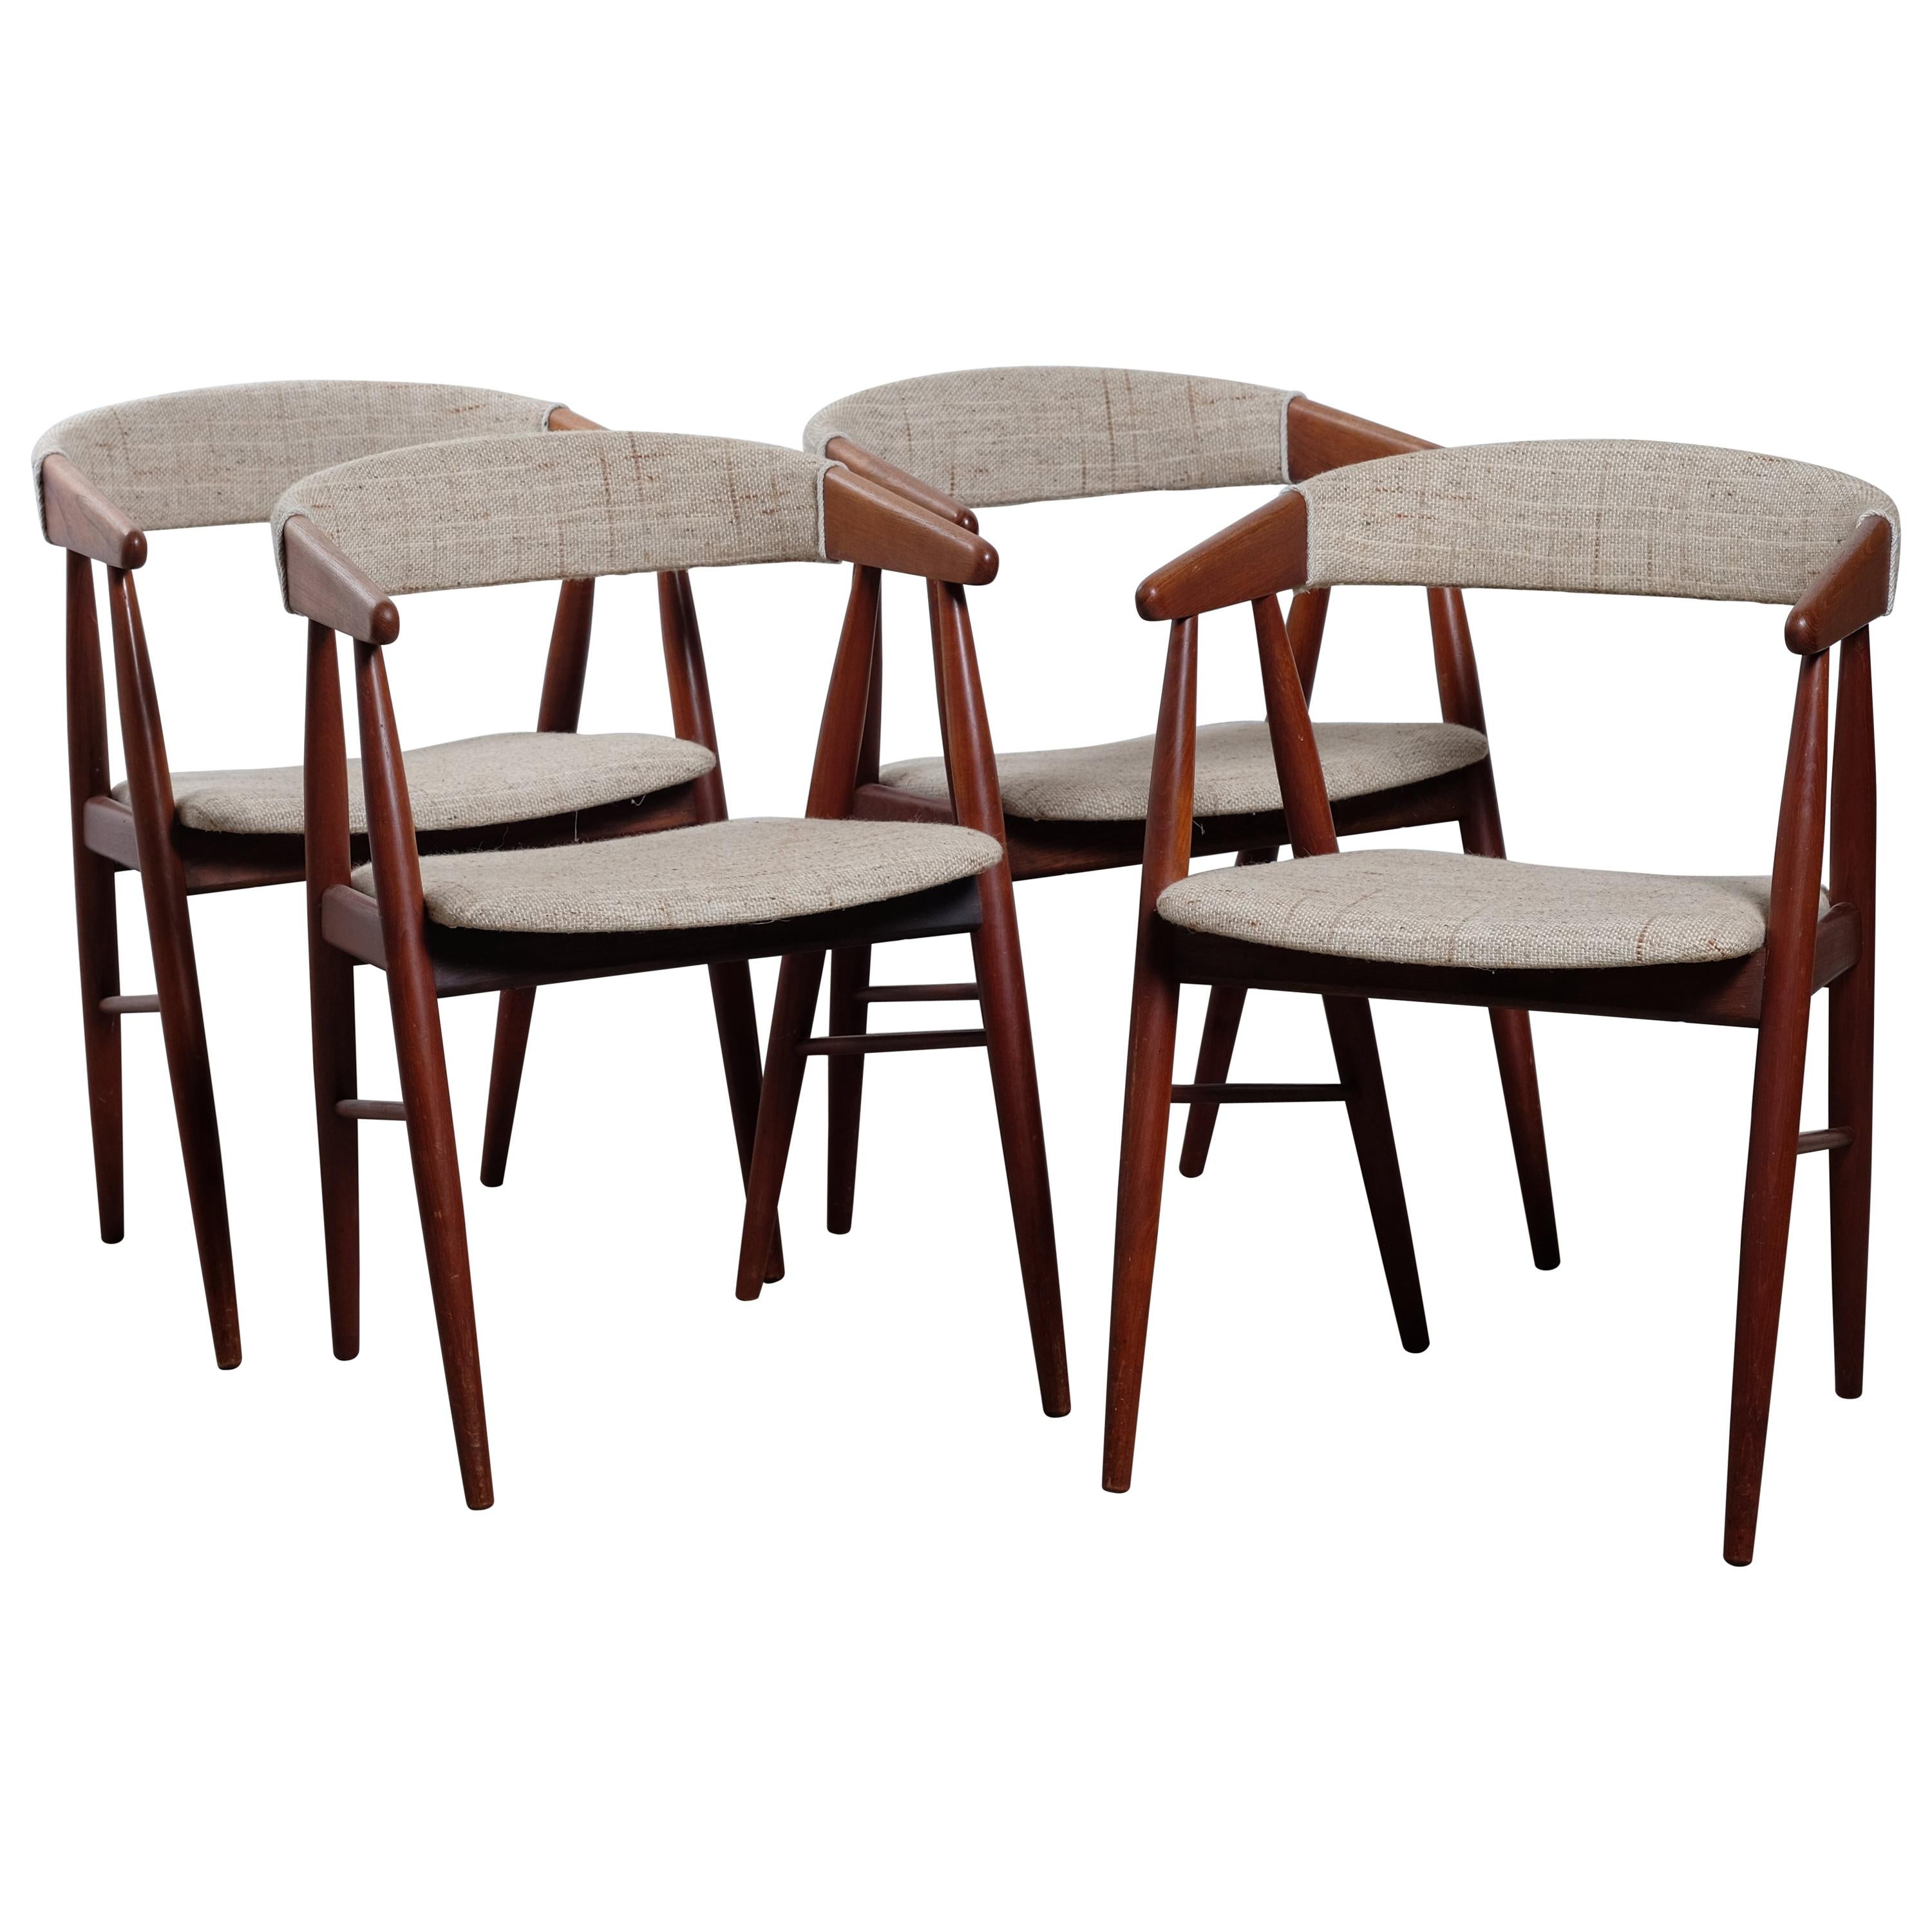 Midcentury Danish Teak Dining Chairs, Set of 4 For Sale